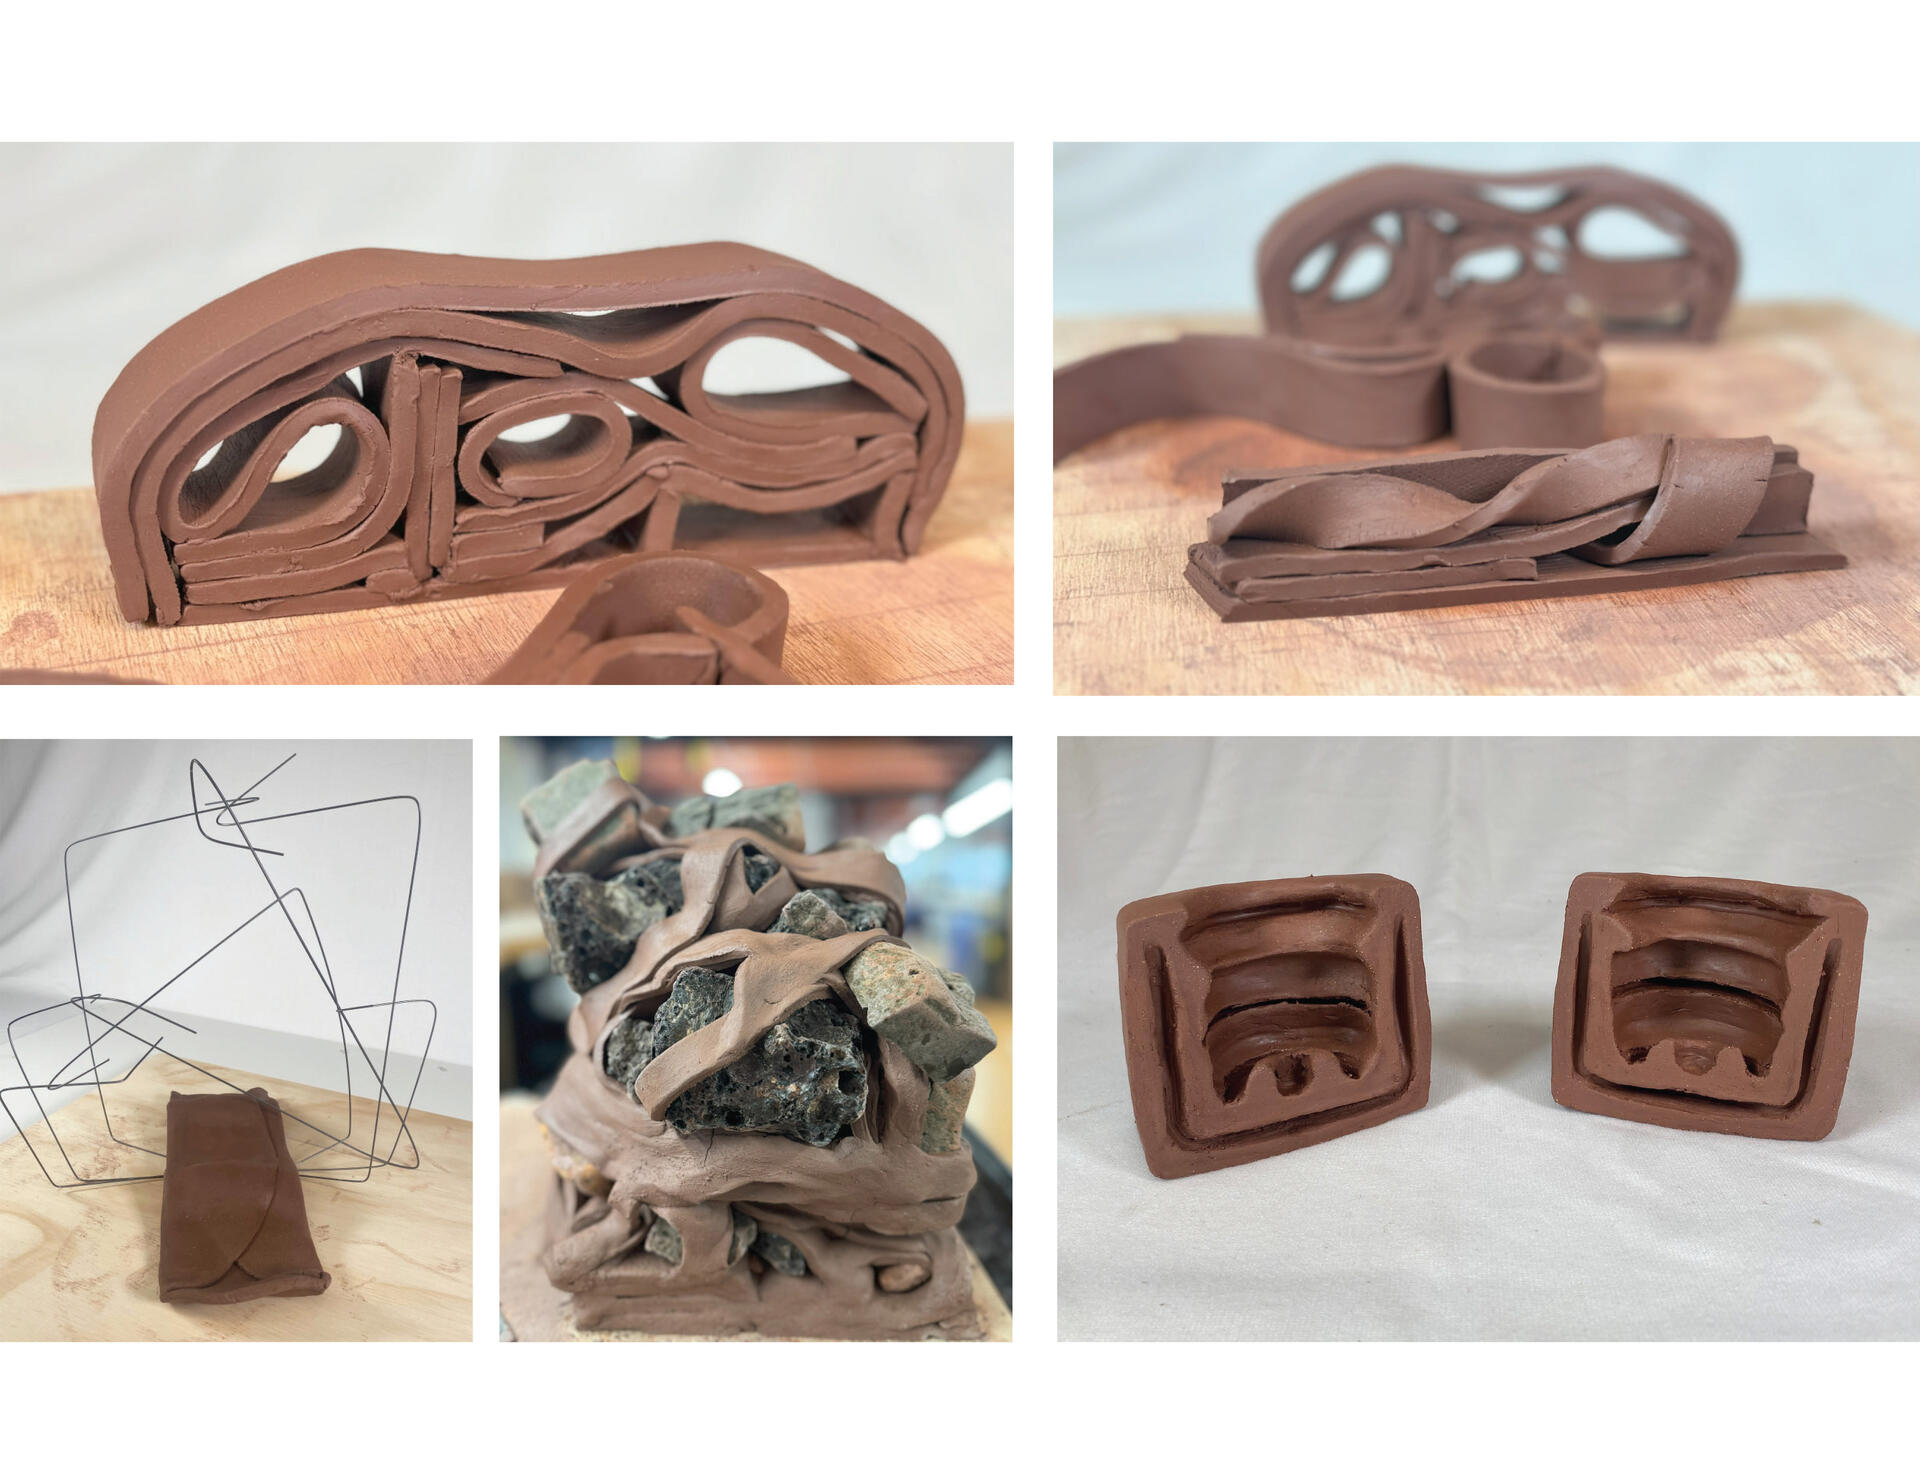 Images shows a series of clay models in which raw terracotta is folded, twisted, and carved in order to produce forms that vary in density, porosity, and curvature.